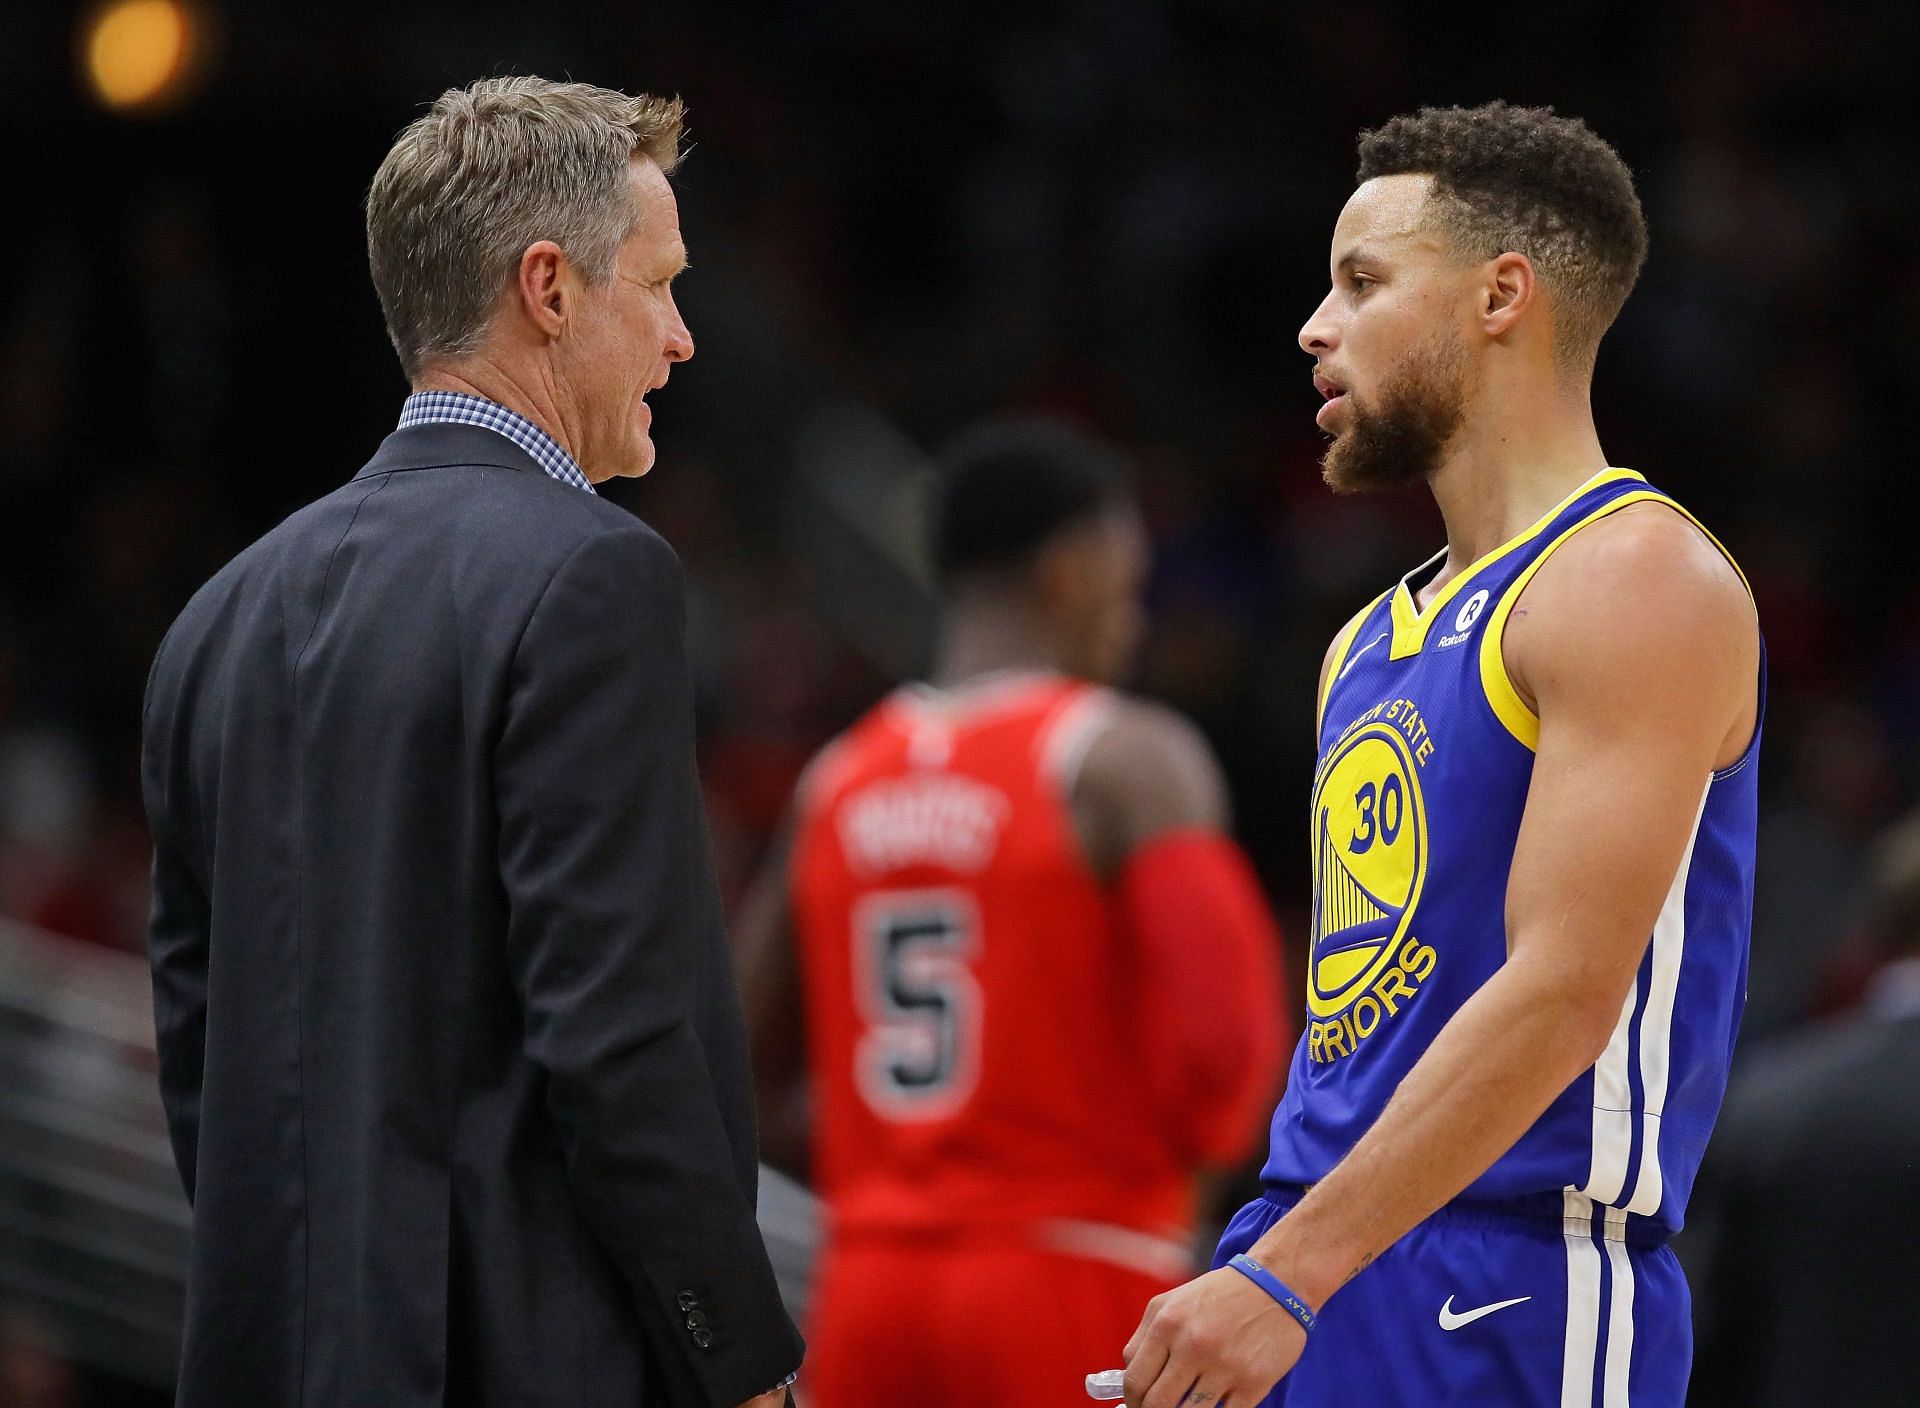 Golden State Warriors head coach Steve Kerr and Steph Curry interact during a game.